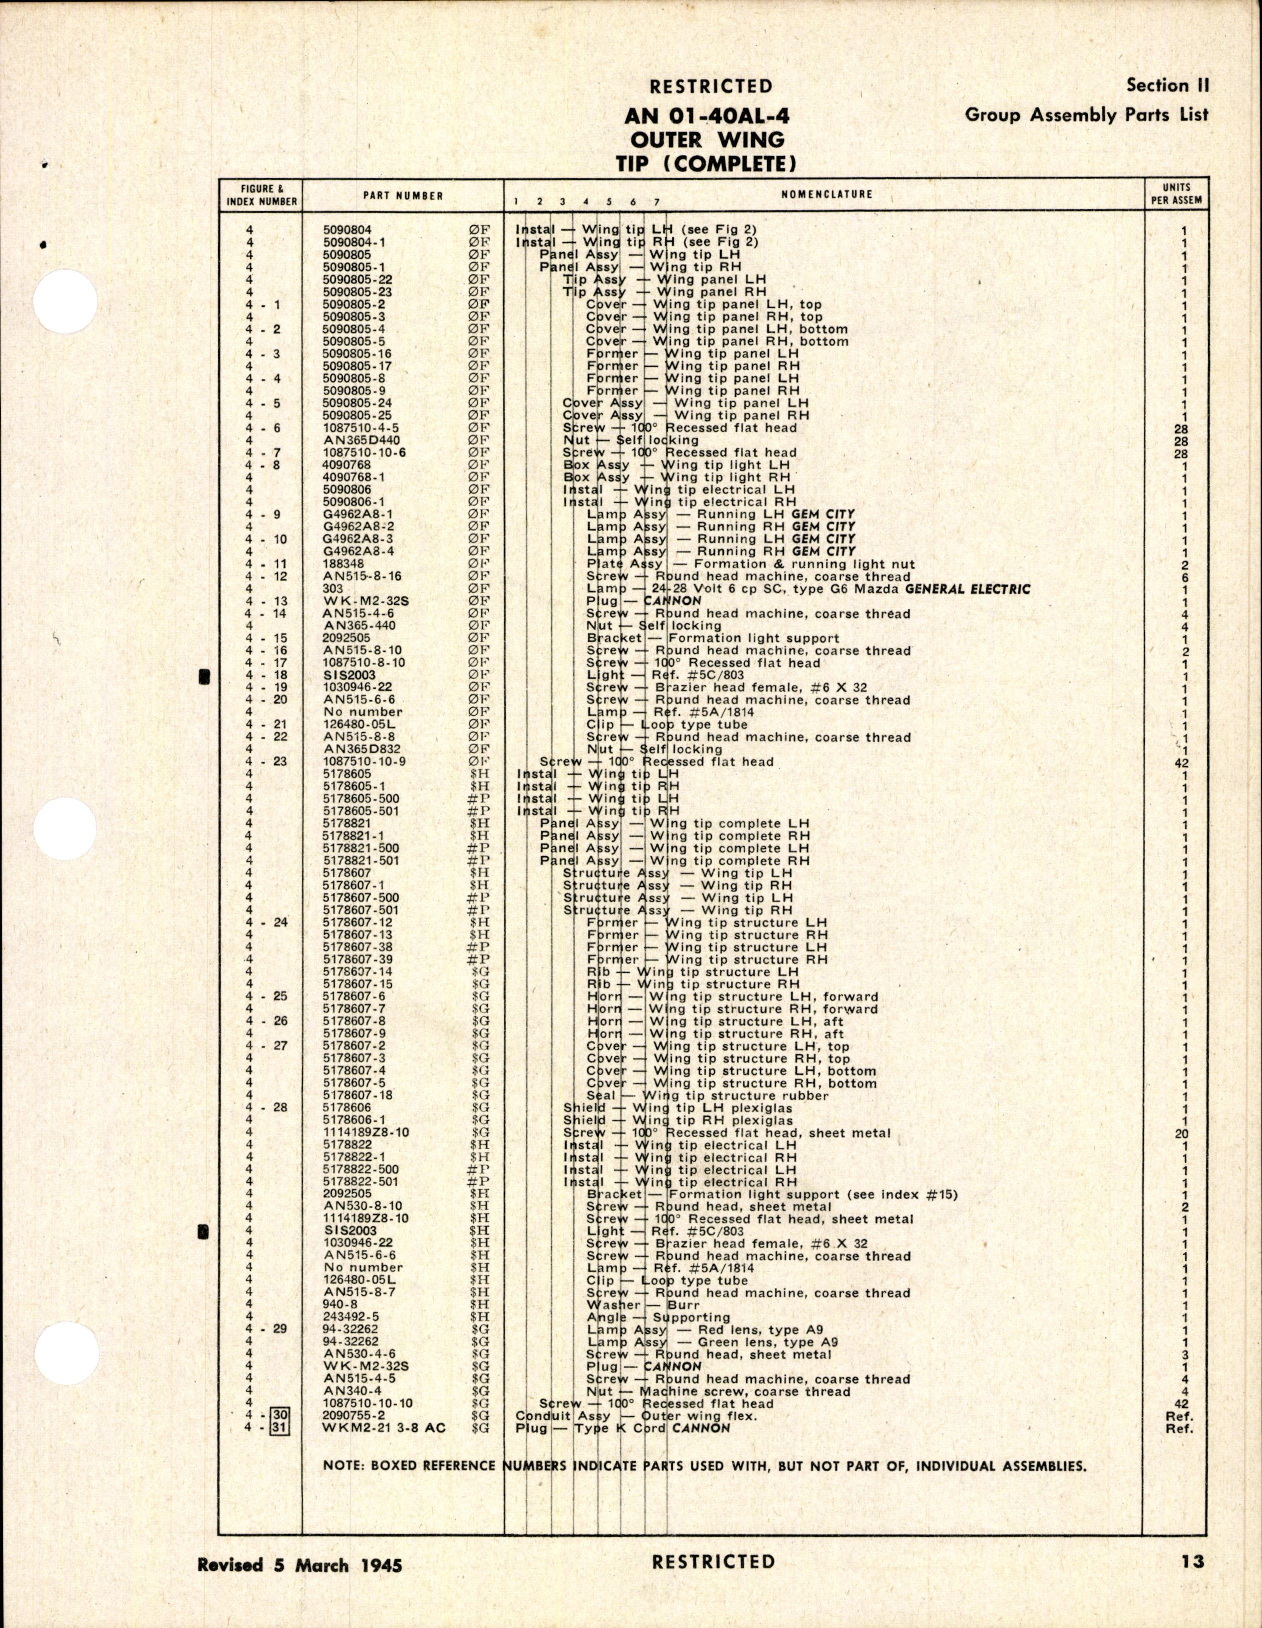 Sample page 7 from AirCorps Library document: Parts Catalog for Models A-20G and A-20J